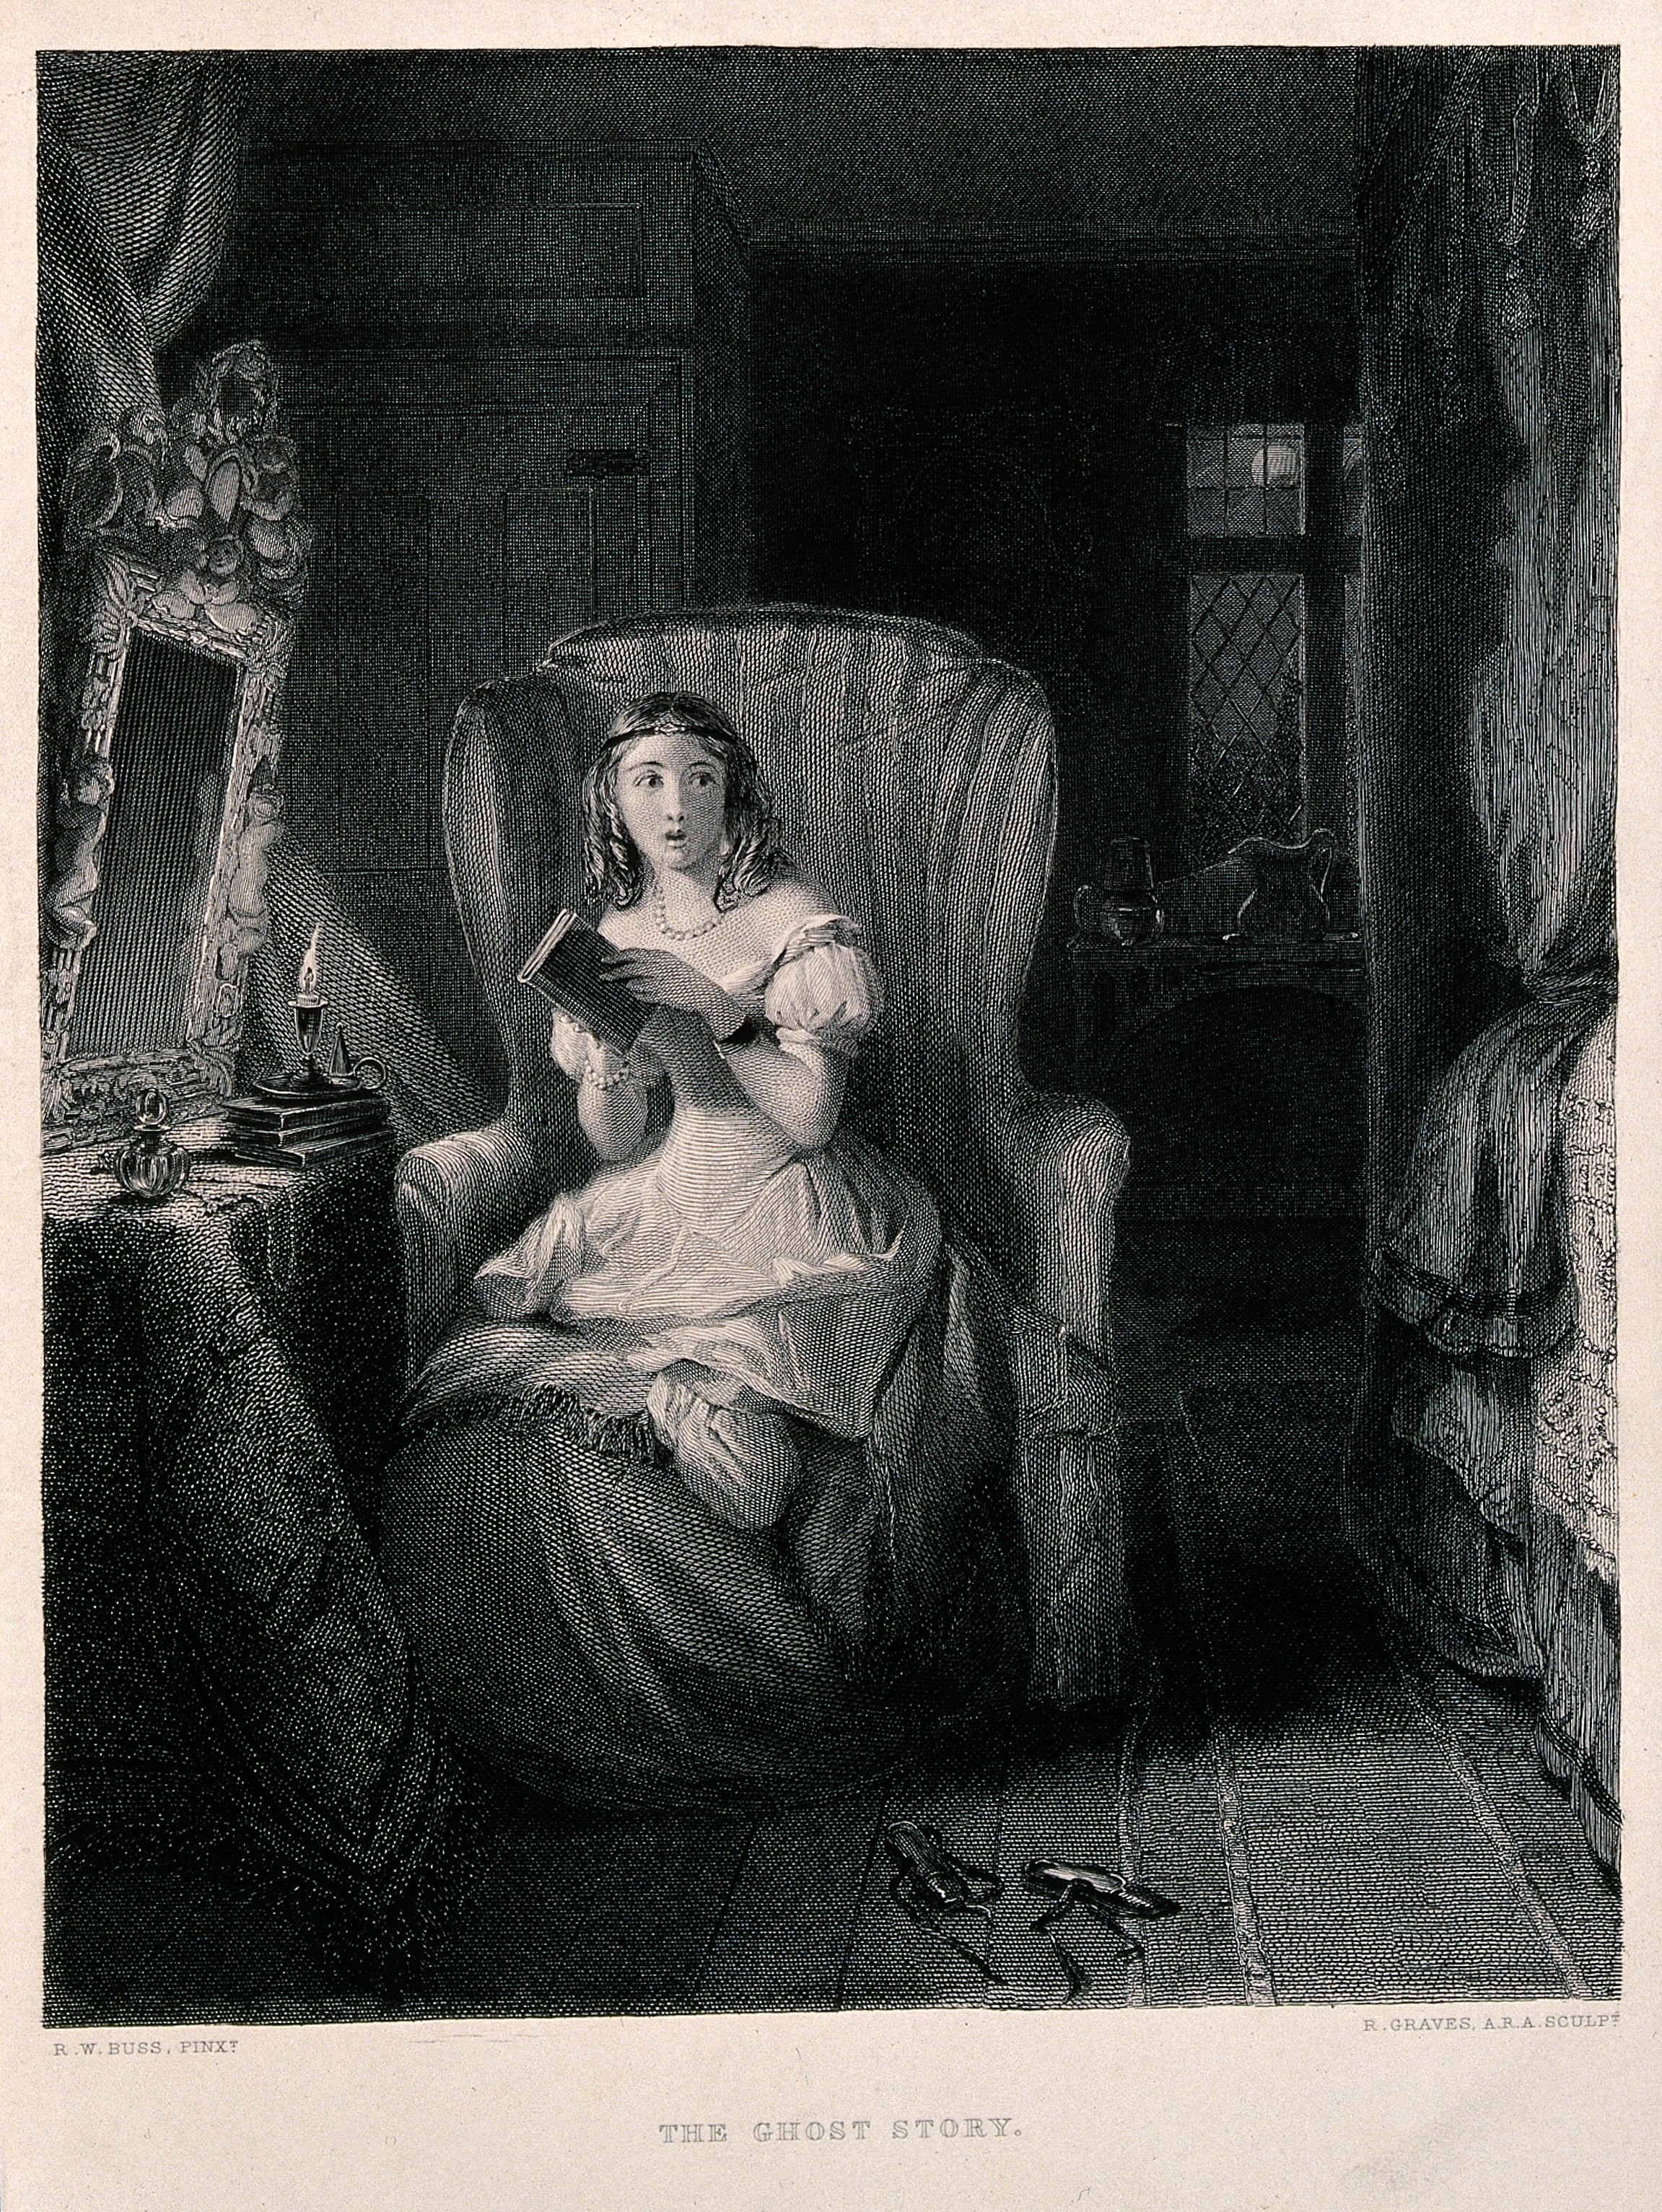 A young woman is sitting in a chair reading a story which ha Wellcome V0040287